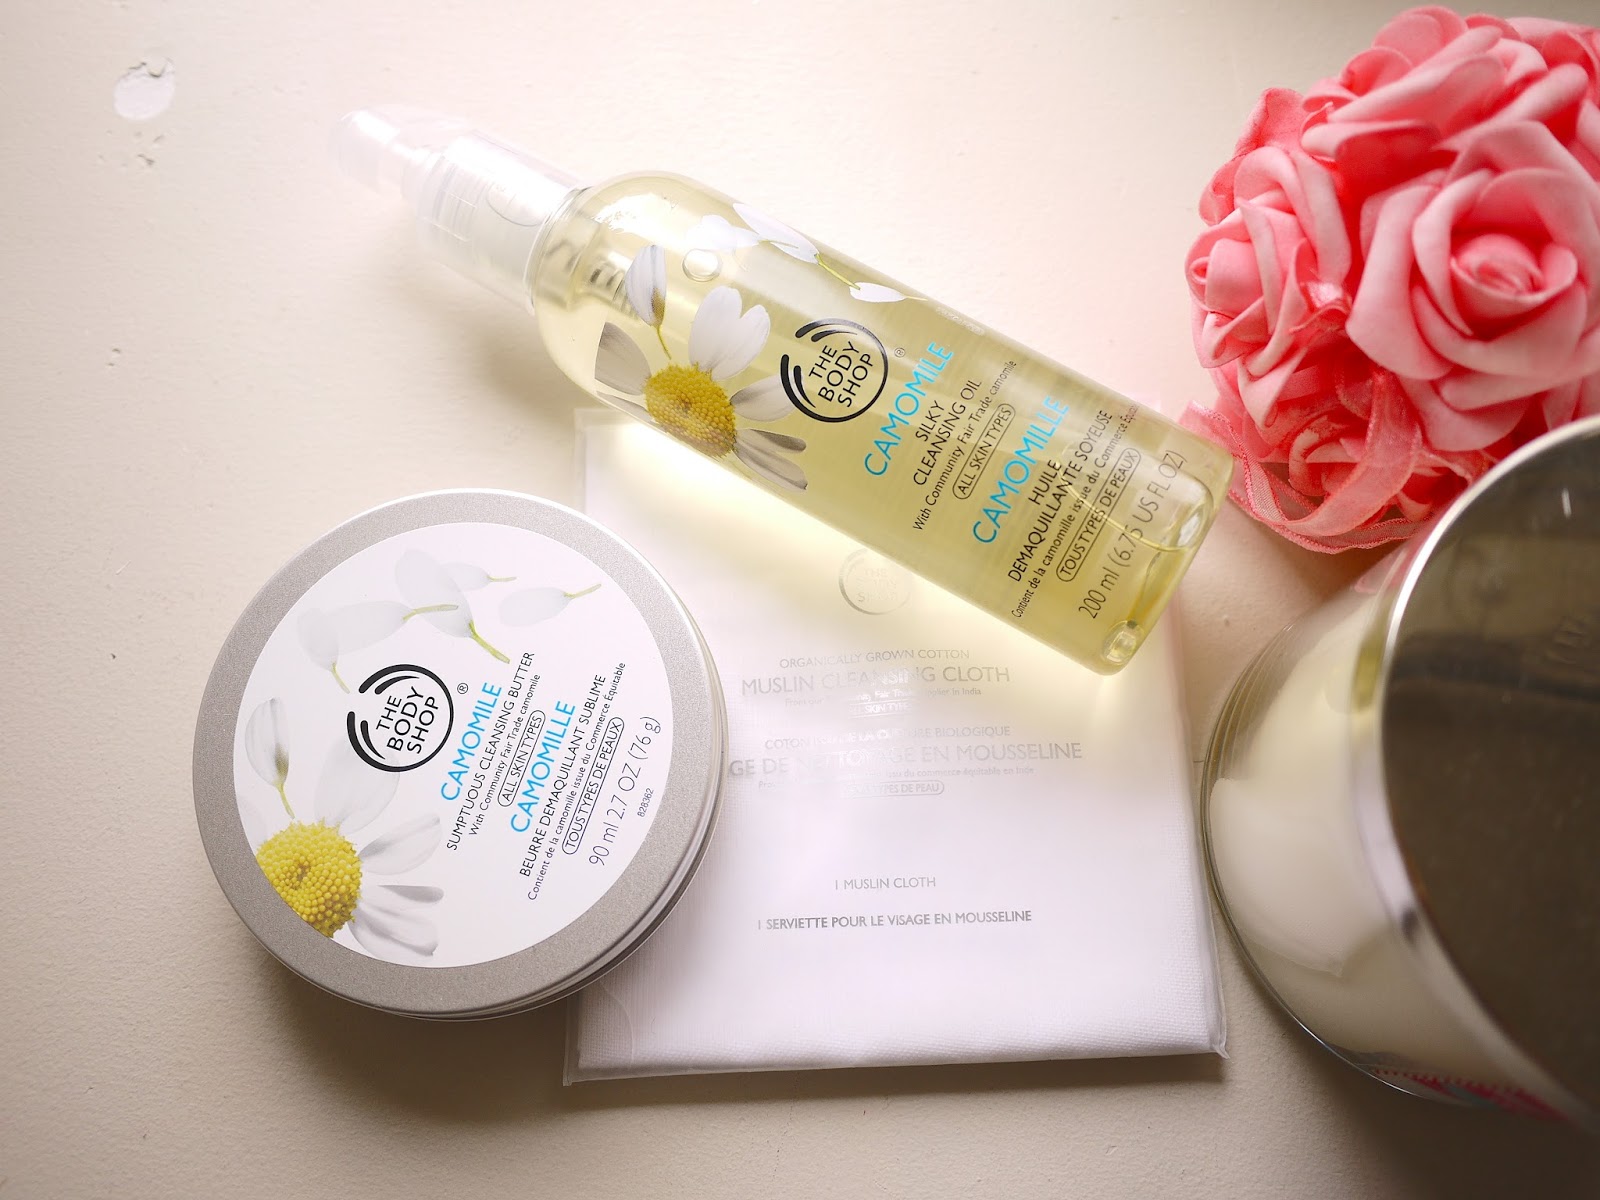 The Body Shop Camomile Silky Cleansing Oil review, The Body Shop Camomile Sumptuous Cleansing Butter, The Body Shop Muslin Cleansing Cloth review